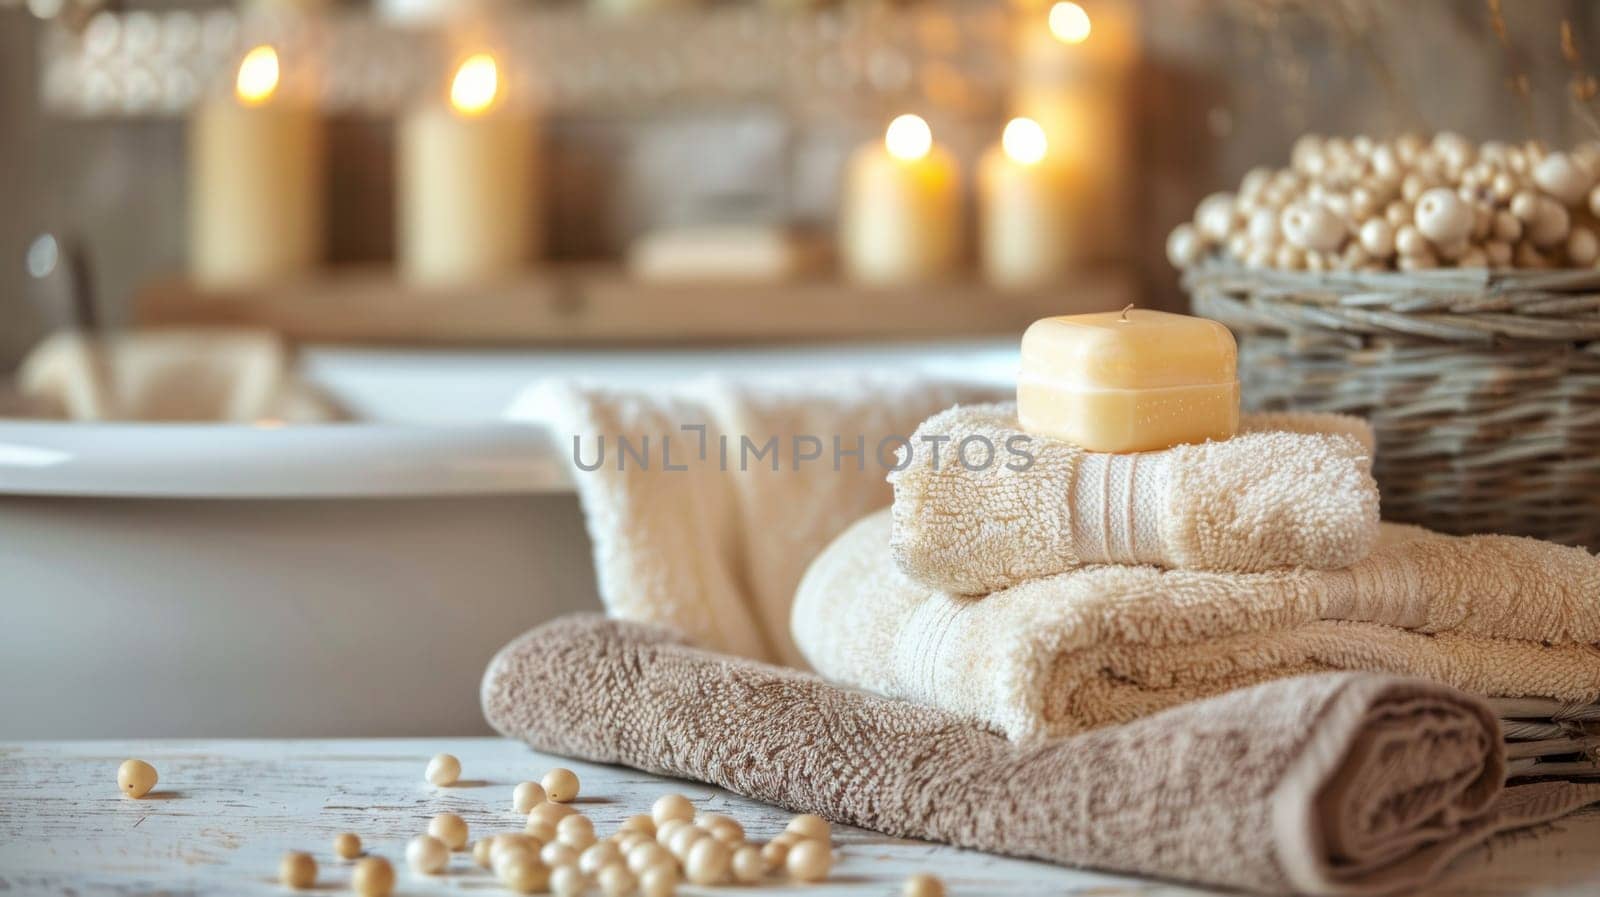 A bunch of towels and candles on a table in front of the tub, AI by starush